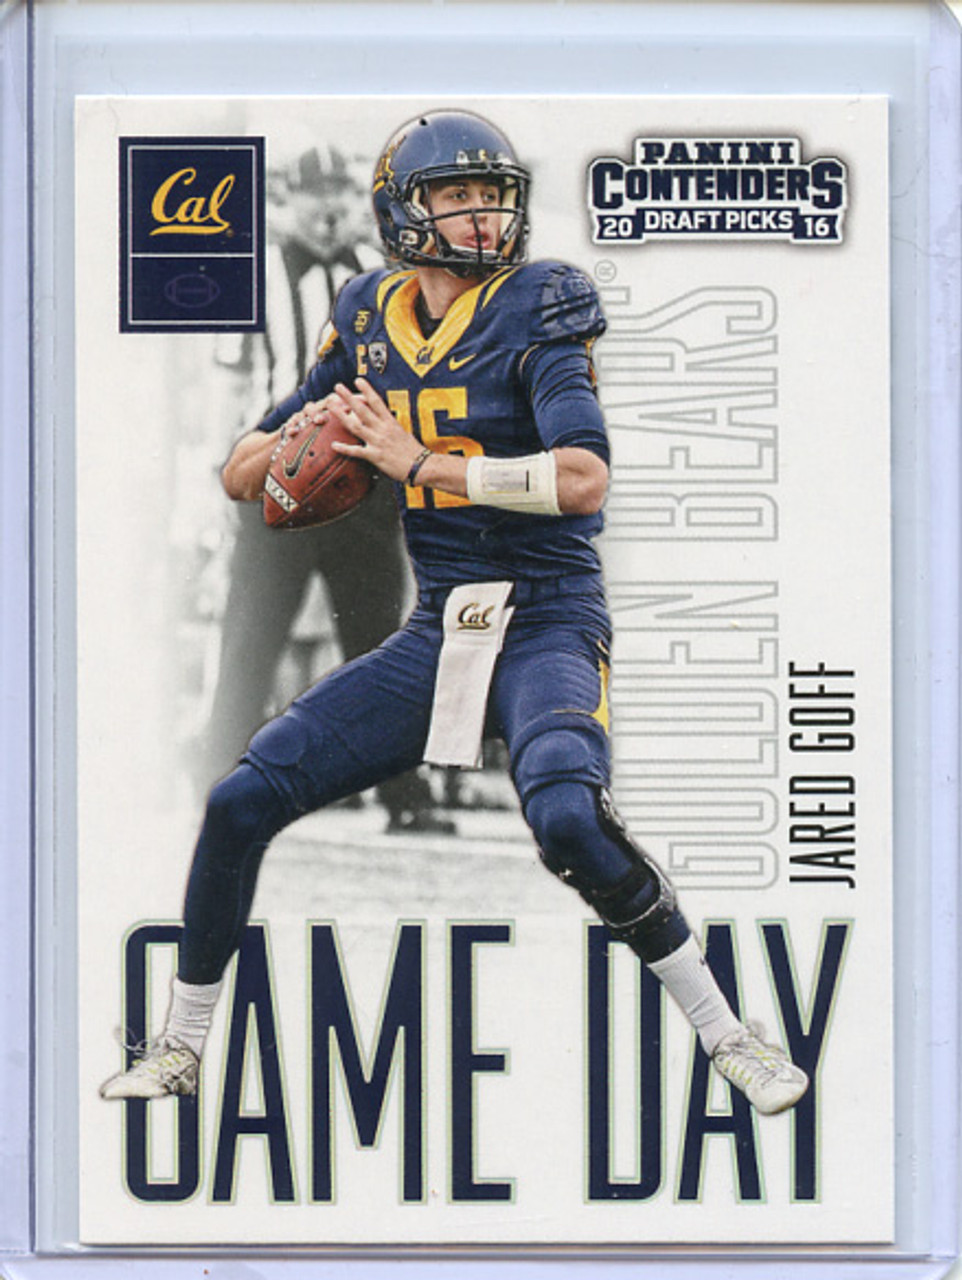 Jared Goff 2016 Contenders Draft Picks, Game Day #2